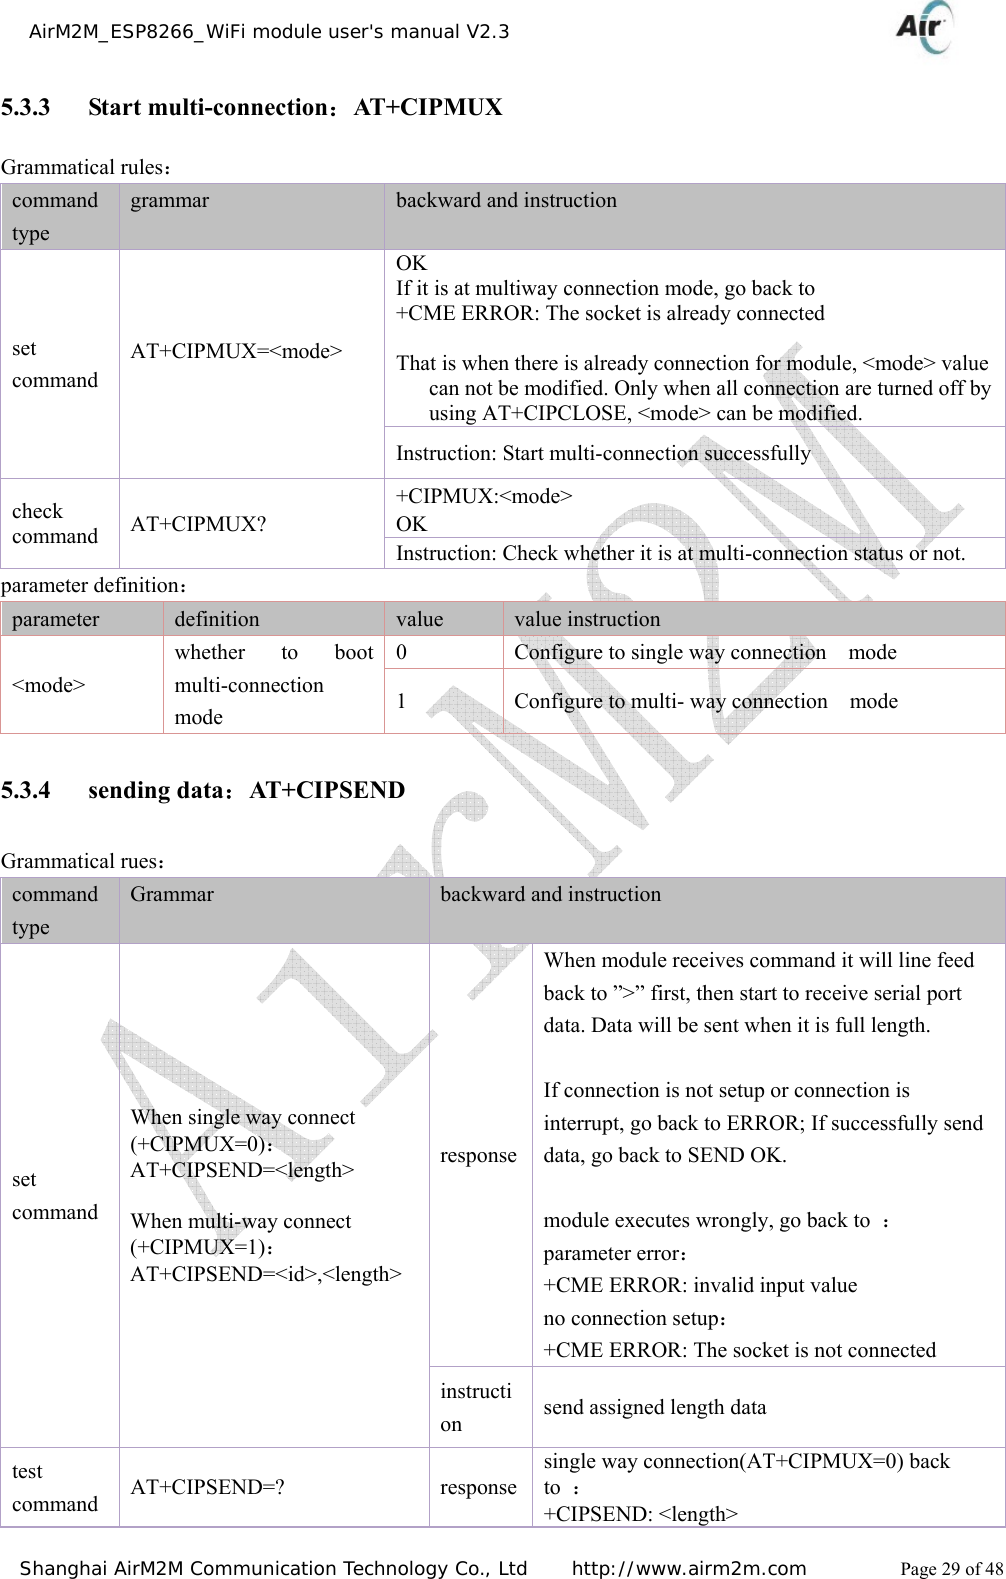    AirM2M_ESP8266_WiFi module user&apos;s manual V2.3   Shanghai AirM2M Communication Technology Co., Ltd     http://www.airm2m.com          Page 29 of 48 5.3.3 Start multi-connection：AT+CIPMUX Grammatical rules： command type grammar  backward and instruction set command AT+CIPMUX=&lt;mode&gt;  OK  If it is at multiway connection mode, go back to   +CME ERROR: The socket is already connected  That is when there is already connection for module, &lt;mode&gt; value  can not be modified. Only when all connection are turned off by using AT+CIPCLOSE, &lt;mode&gt; can be modified. Instruction: Start multi-connection successfully check command  AT+CIPMUX? +CIPMUX:&lt;mode&gt; OK  Instruction: Check whether it is at multi-connection status or not. parameter definition： parameter   definition  value  value instruction &lt;mode&gt; whether to boot multi-connection mode 0  Configure to single way connection    mode 1  Configure to multi- way connection    mode 5.3.4 sending data：AT+CIPSEND Grammatical rues： command type Grammar  backward and instruction set command When single way connect   (+CIPMUX=0)： AT+CIPSEND=&lt;length&gt;  When multi-way connect (+CIPMUX=1)： AT+CIPSEND=&lt;id&gt;,&lt;length&gt; responseWhen module receives command it will line feed back to ”&gt;” first, then start to receive serial port data. Data will be sent when it is full length.  If connection is not setup or connection is interrupt, go back to ERROR; If successfully send data, go back to SEND OK.  module executes wrongly, go back to  ： parameter error： +CME ERROR: invalid input value no connection setup： +CME ERROR: The socket is not connected instruction  send assigned length data test command  AT+CIPSEND=? responsesingle way connection(AT+CIPMUX=0) back to  ： +CIPSEND: &lt;length&gt; 